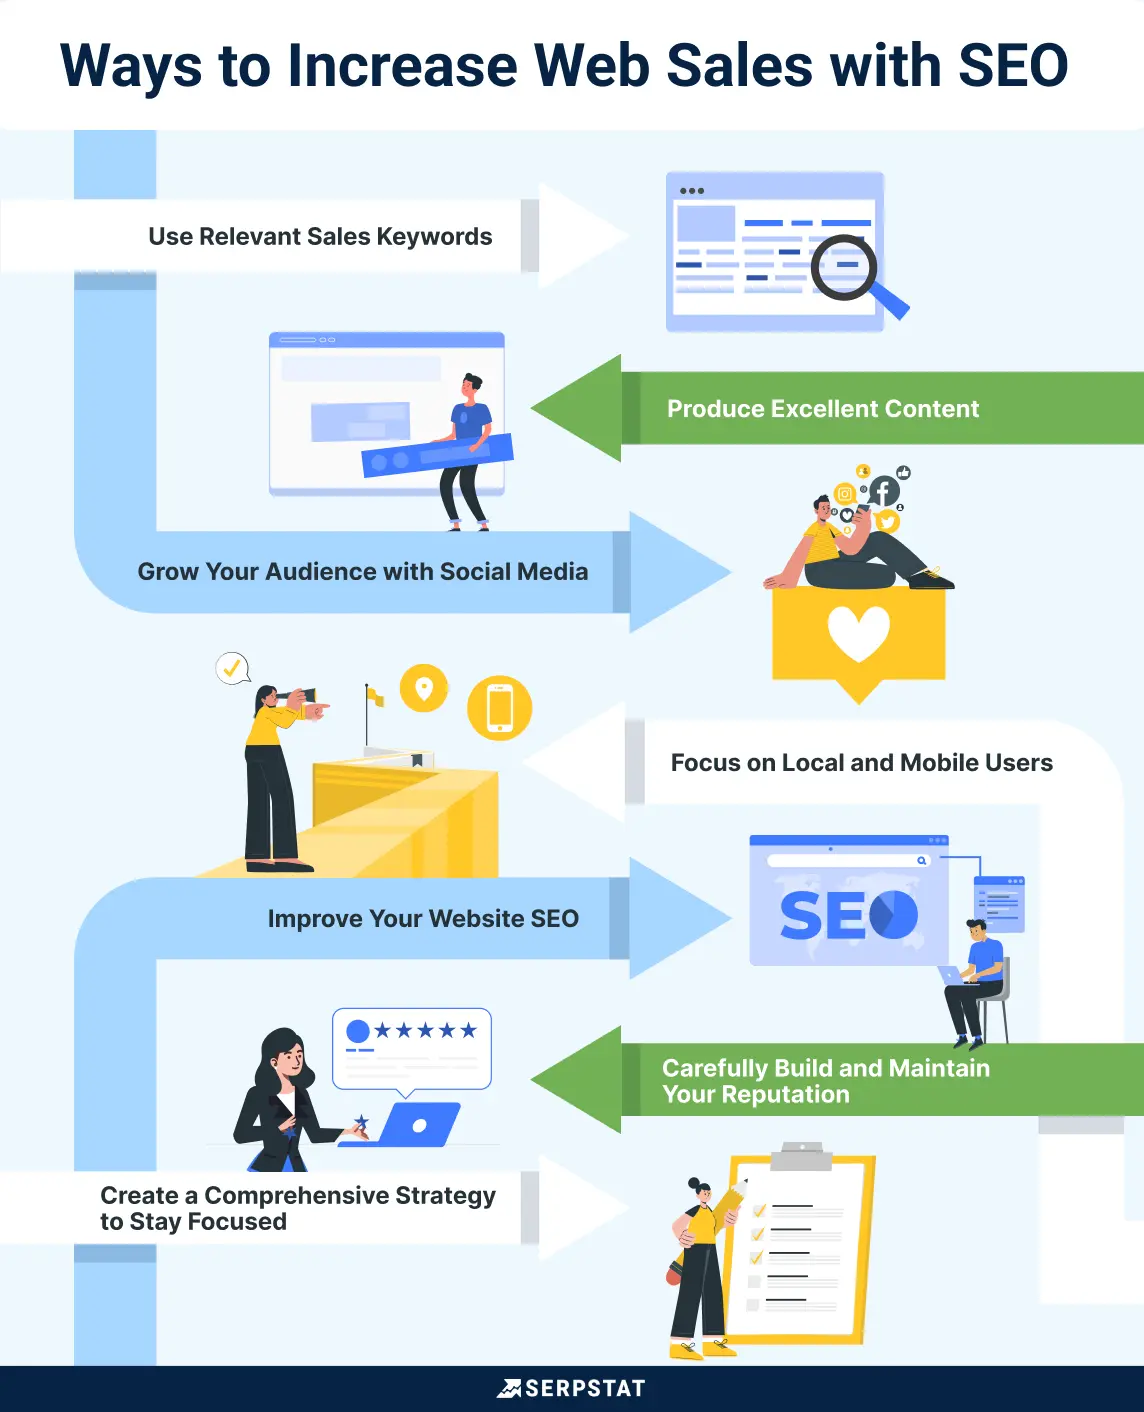 Ways to increase web sales with SEO